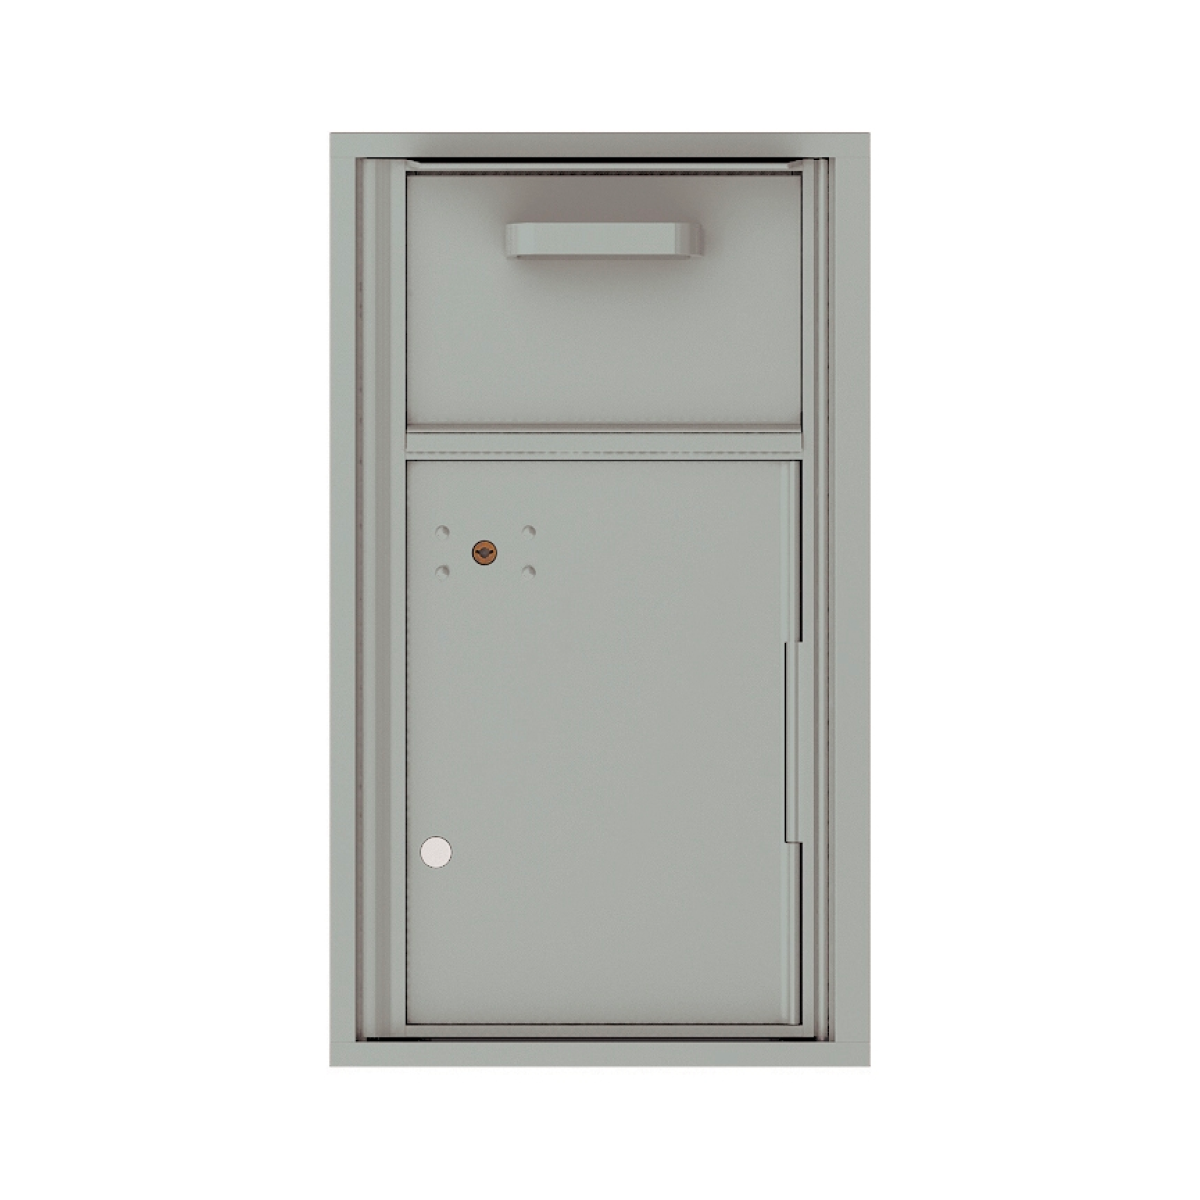 4C Mailboxes 4C08S-HOP Collection and Drop Box Product Image